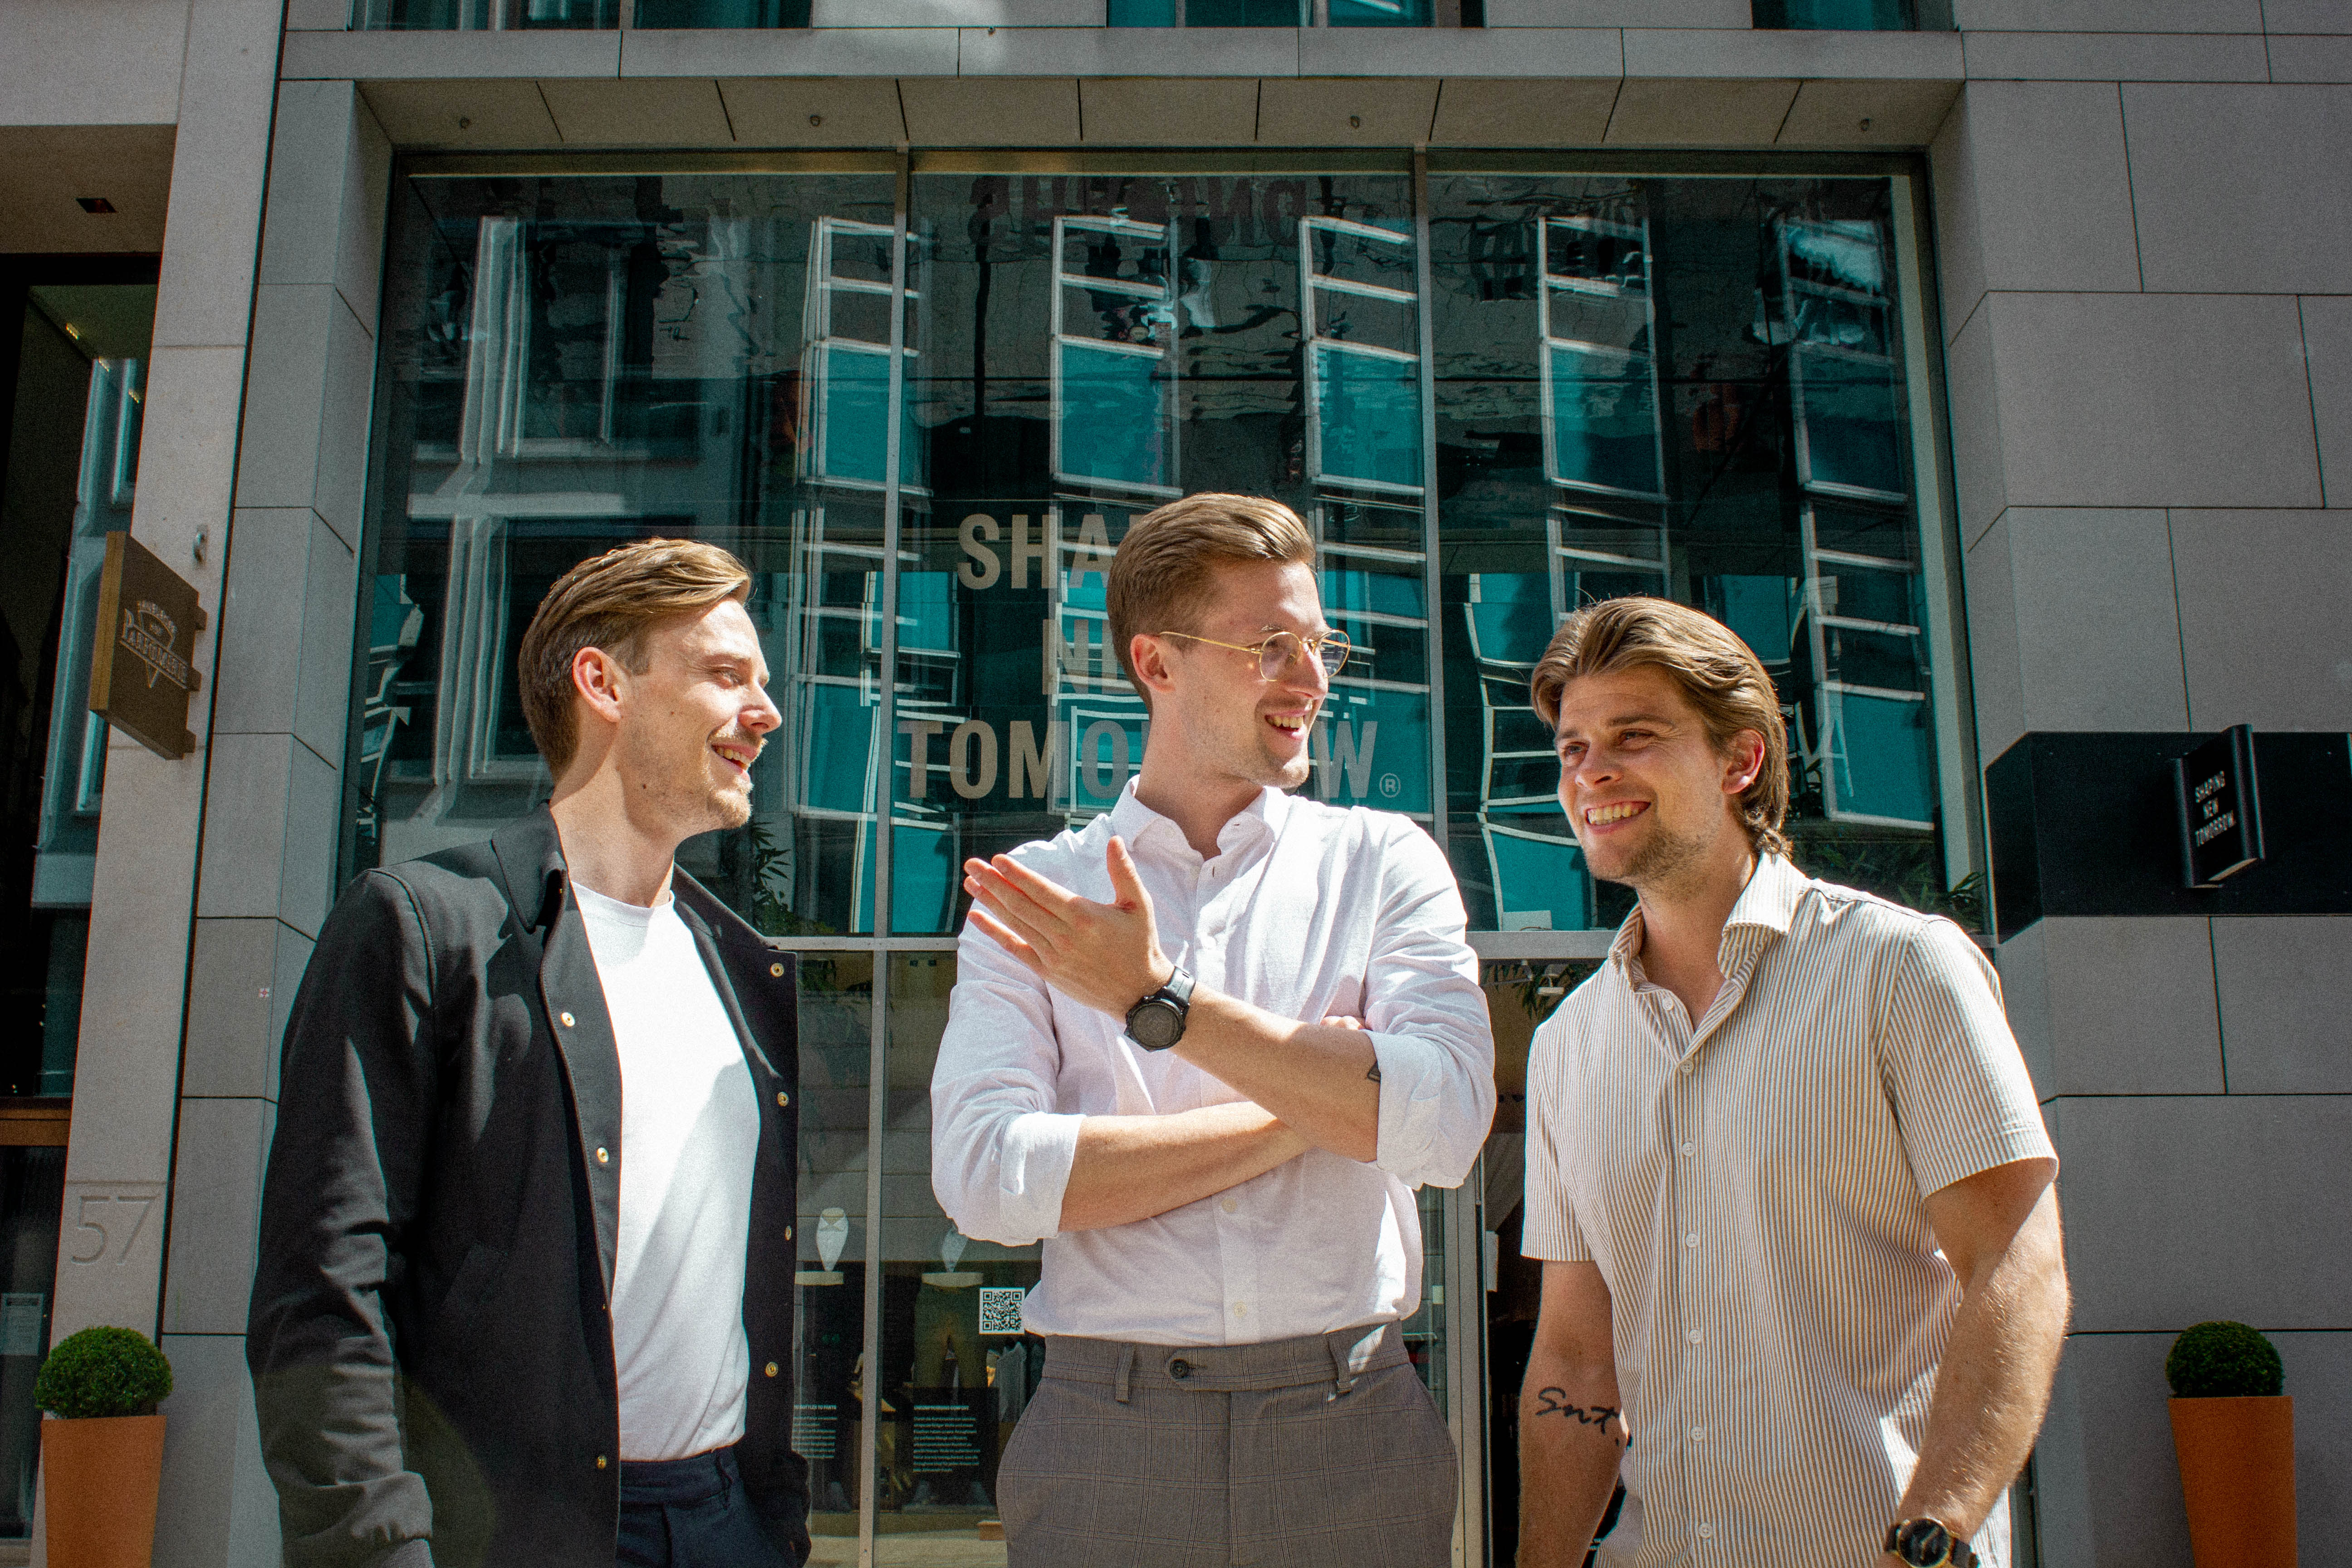 Christian Aachmann(left), Kasper Ulrich (center), and Christoffer Bak (right) stand in front of a Shaping New Tomorrow store. 